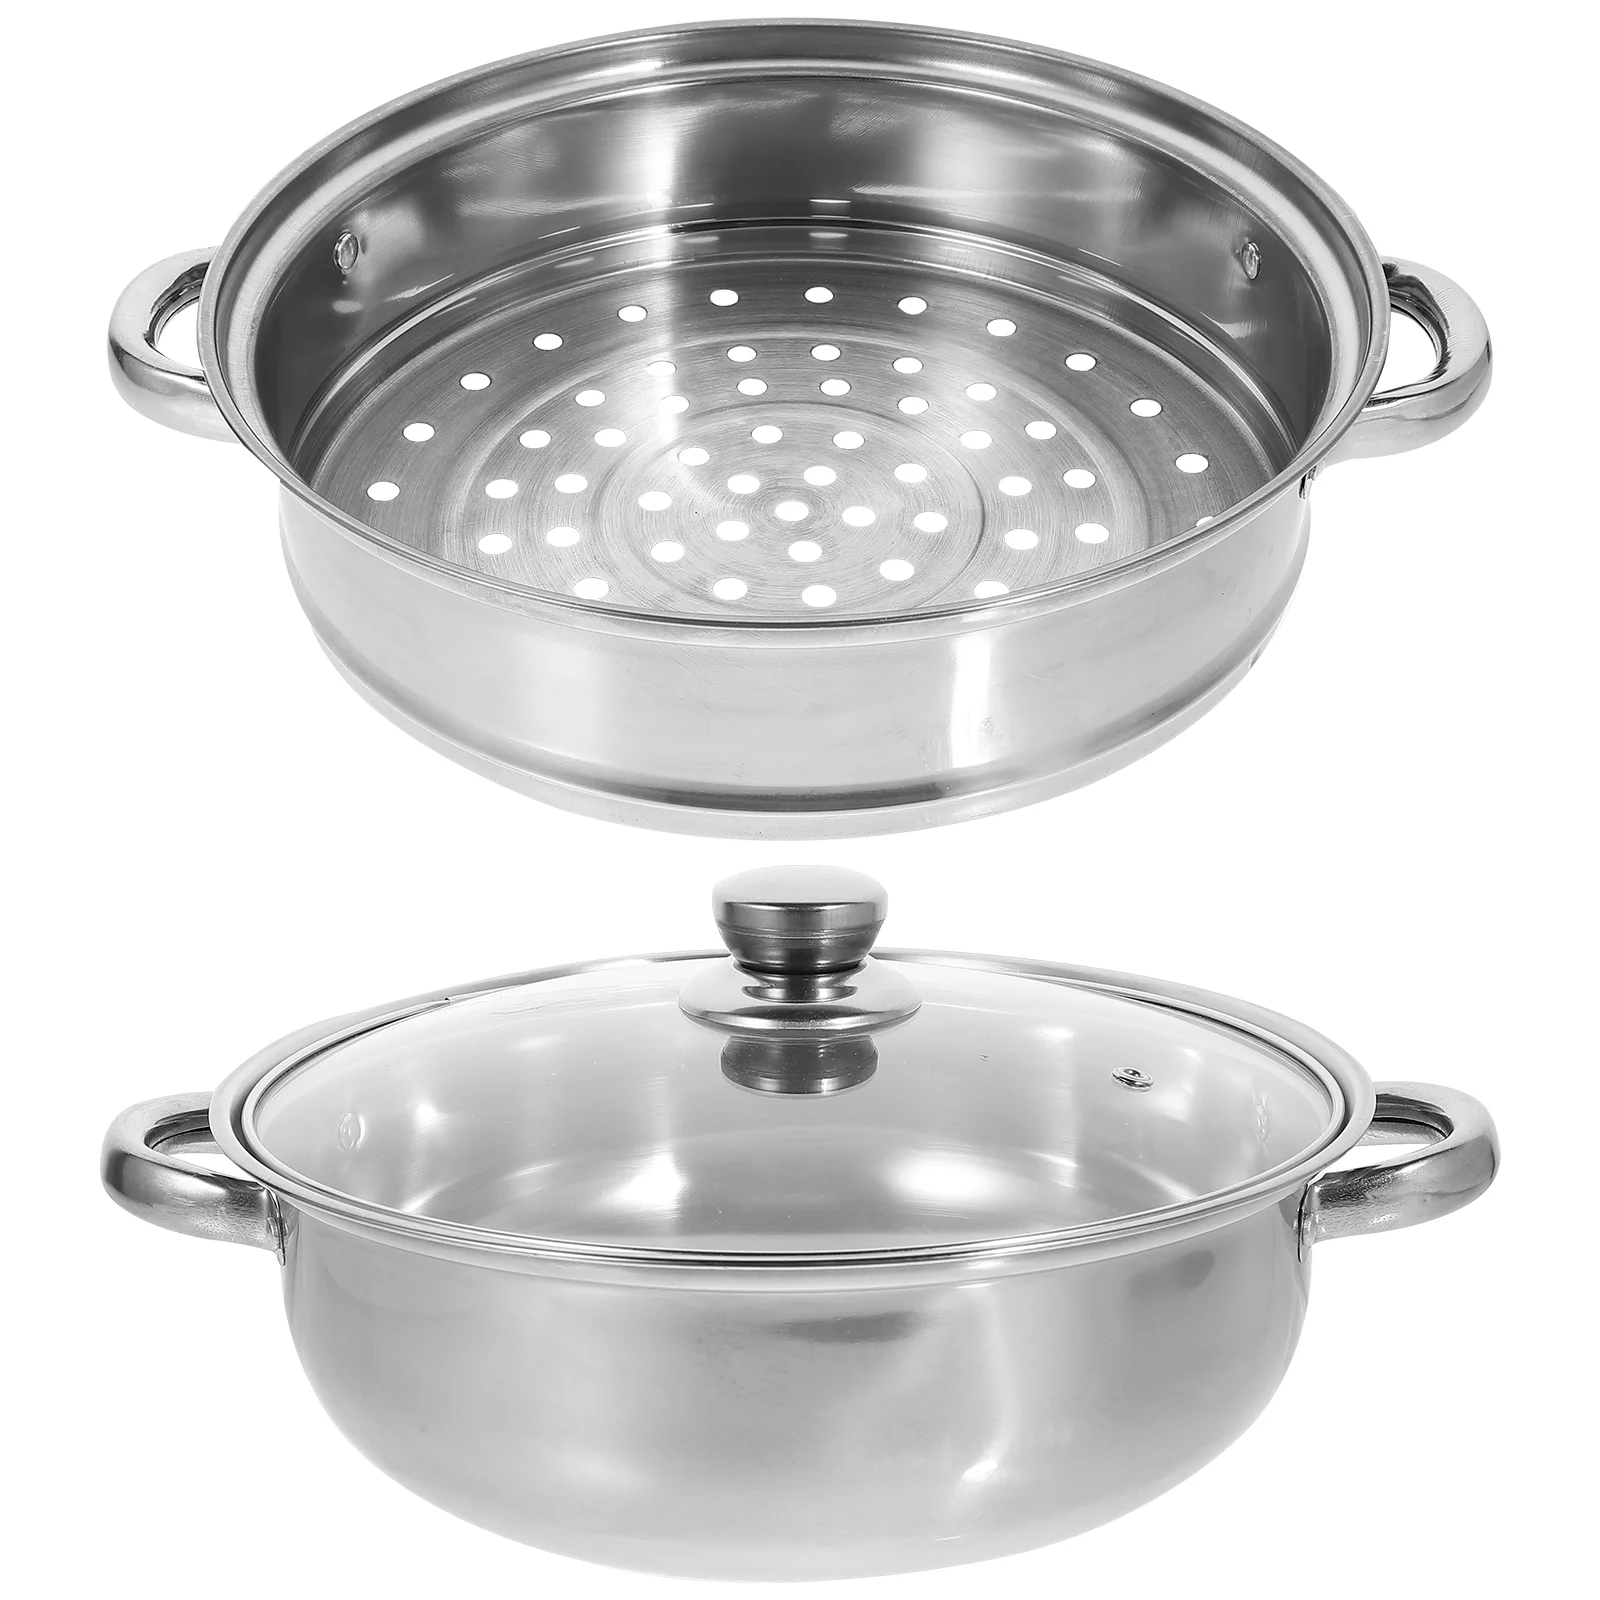 

Stainless Steel Steamer Reusable Home Pot Cooking Practical Lidded Multi-functional Basket Food Asian Vegetables Cookware